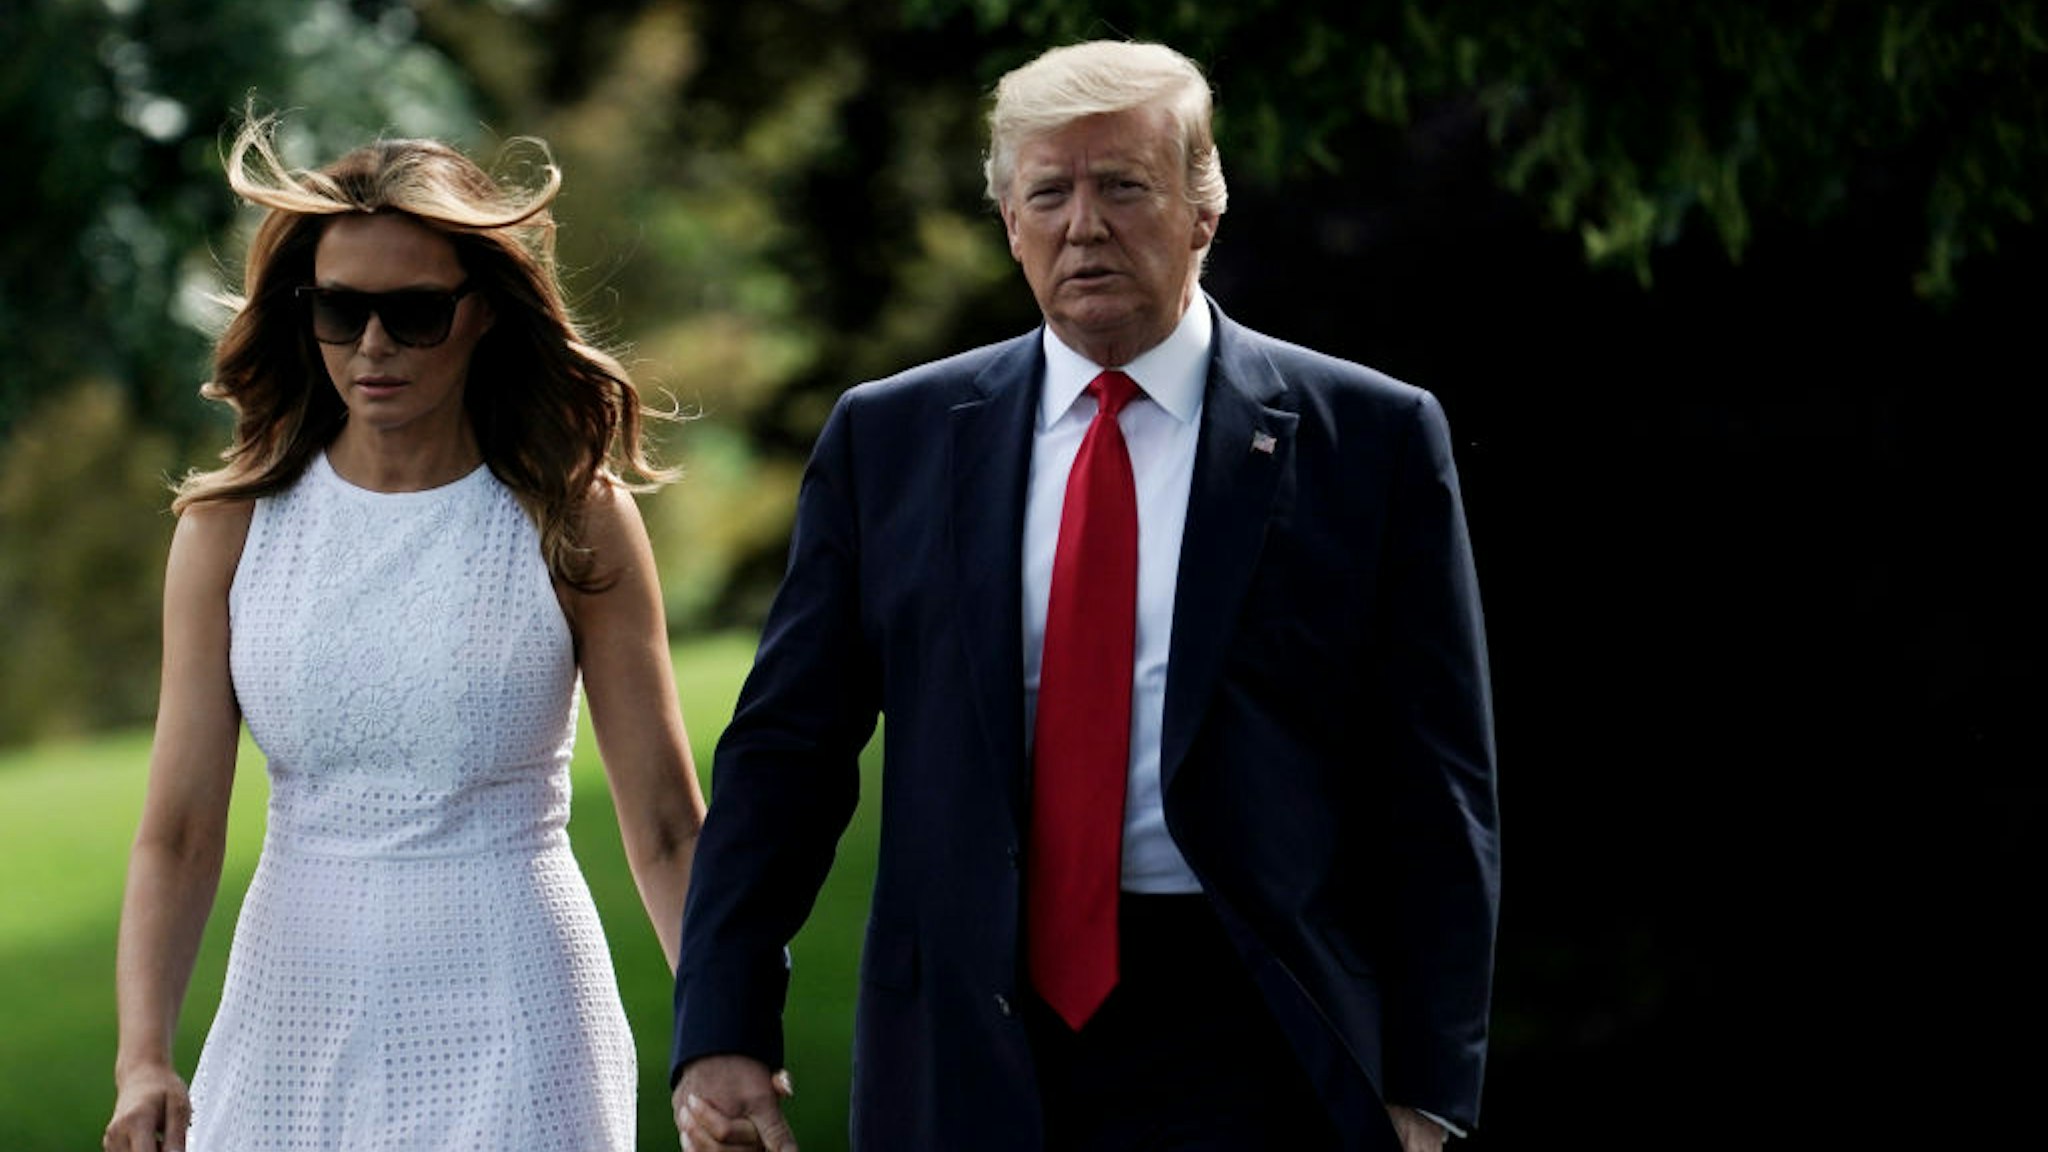 President Donald Trump walks with first lady Melania Trump prior to a departure from the White House